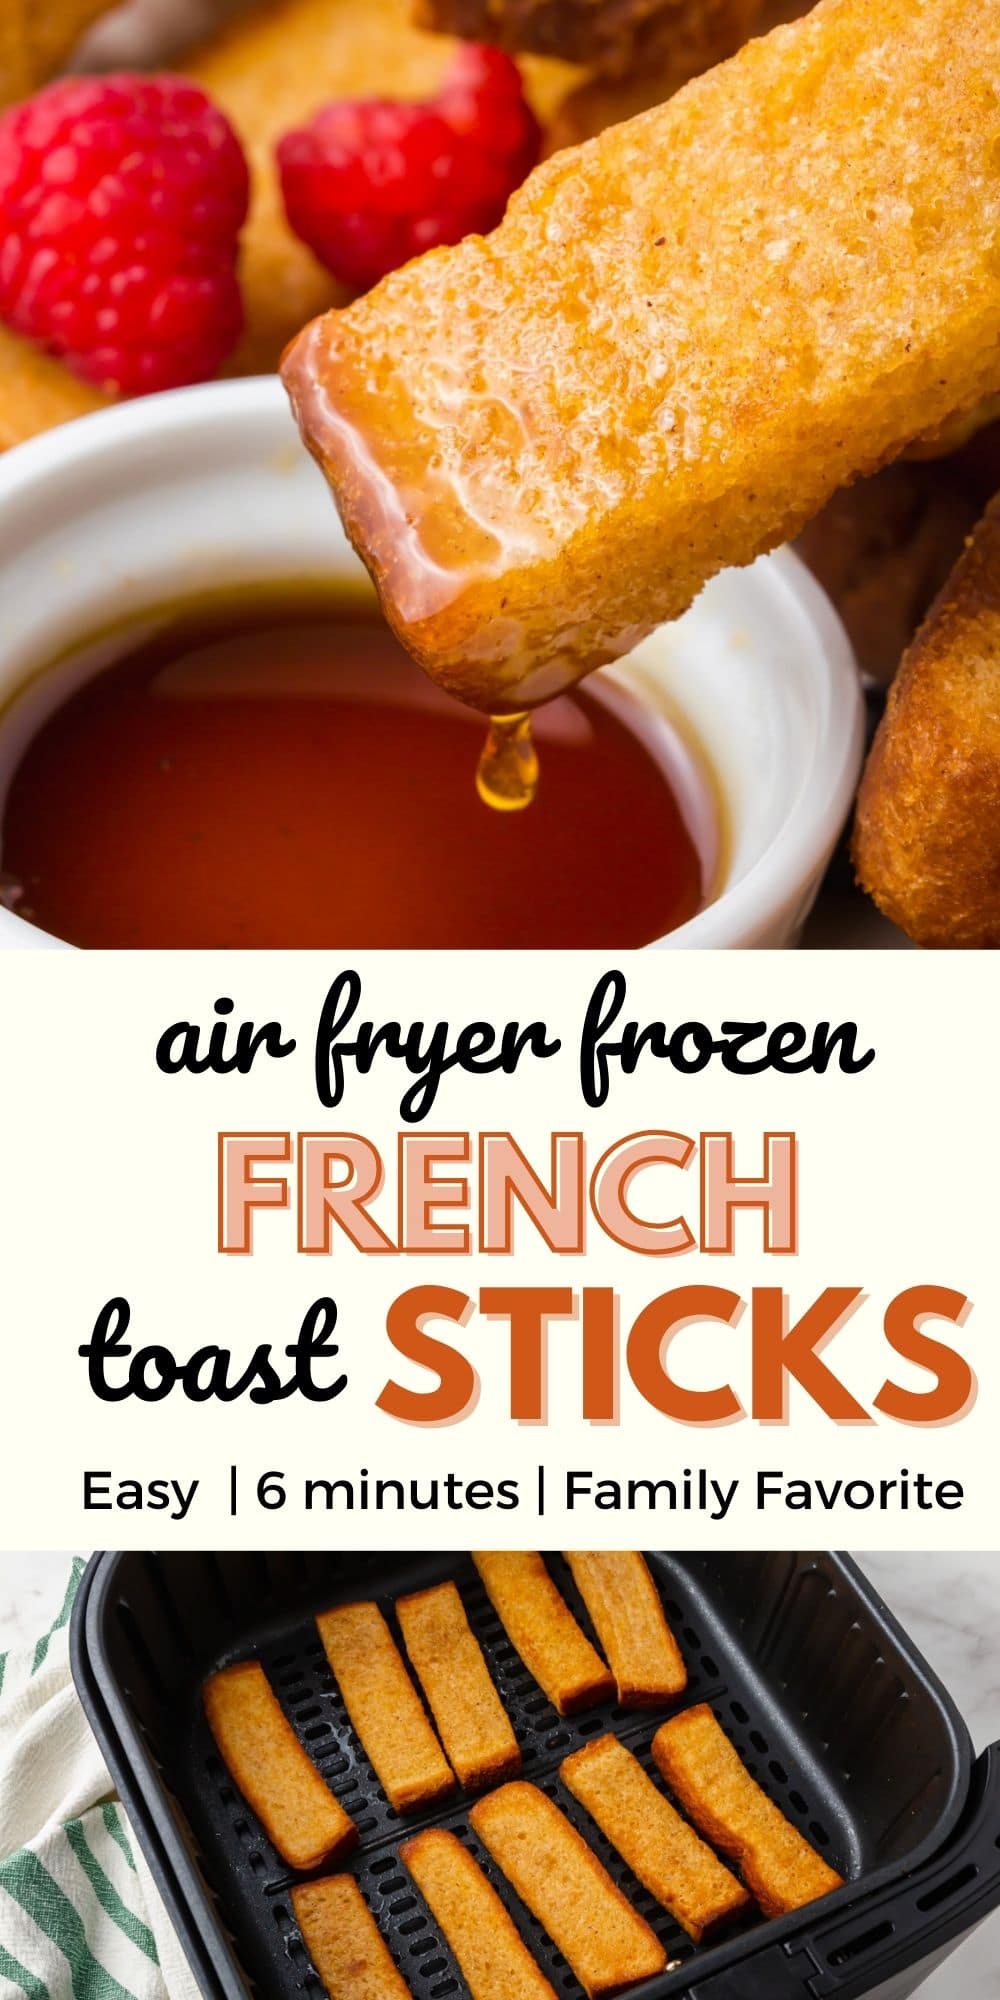 two images of french toast sticks in the air fryer, with text in center or images that says Air Fryer frozen French toast sticks